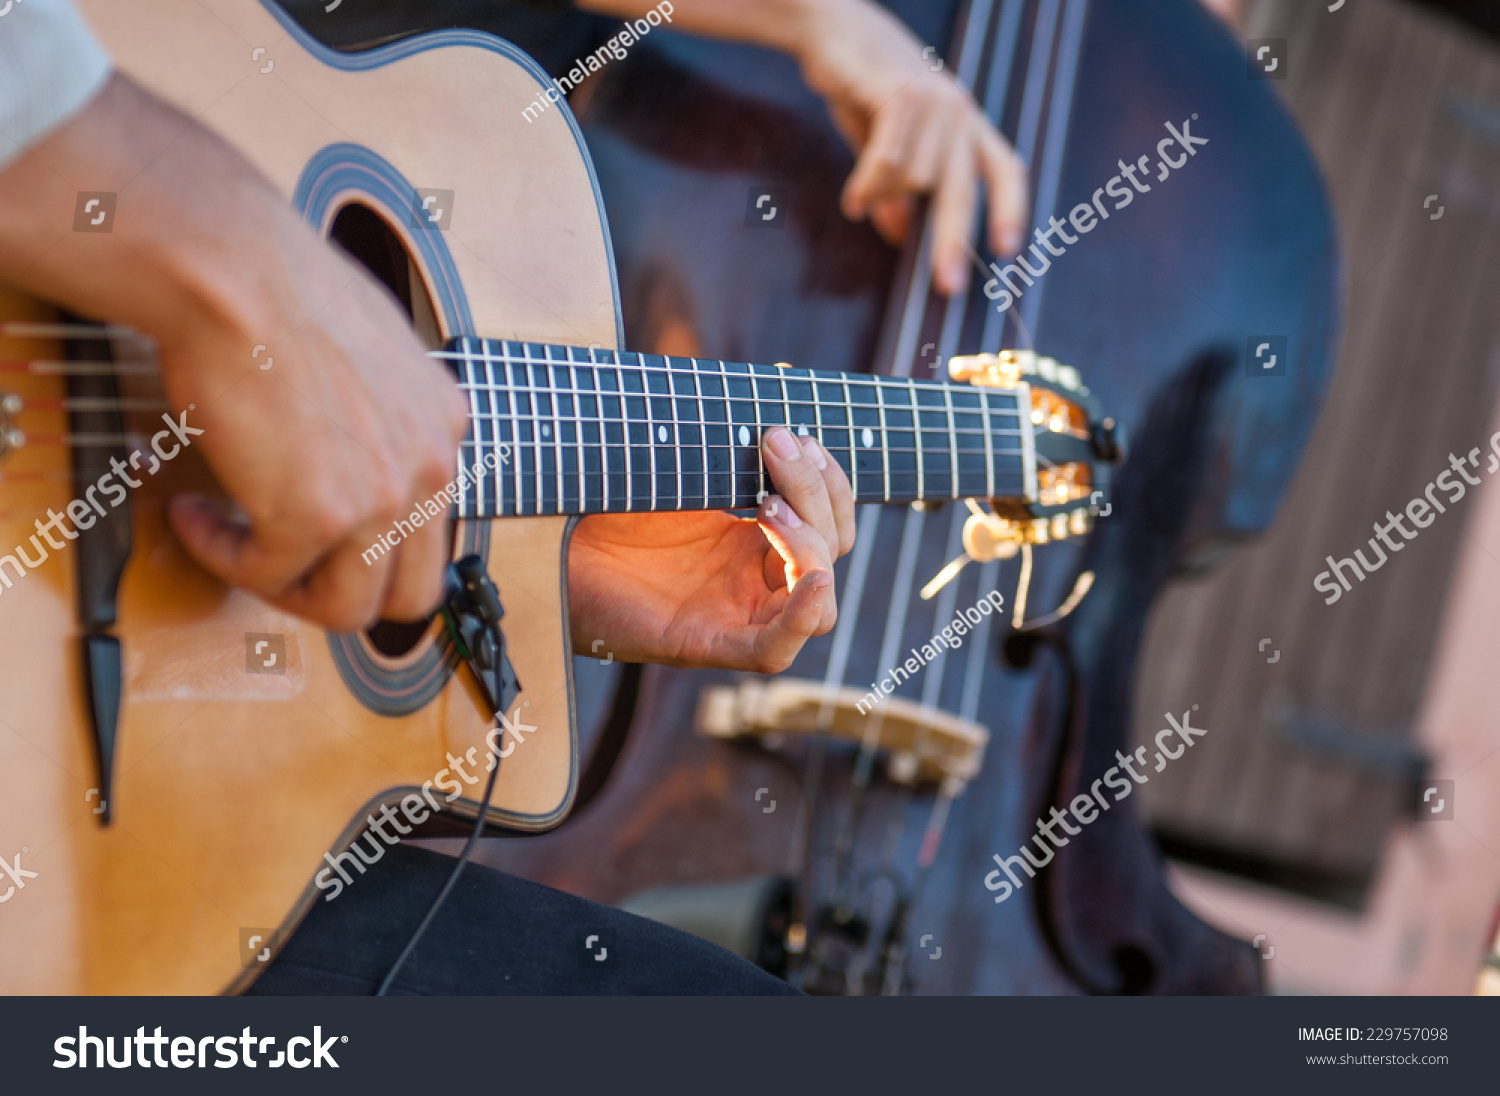 a musician makes his performance during a party #229757098